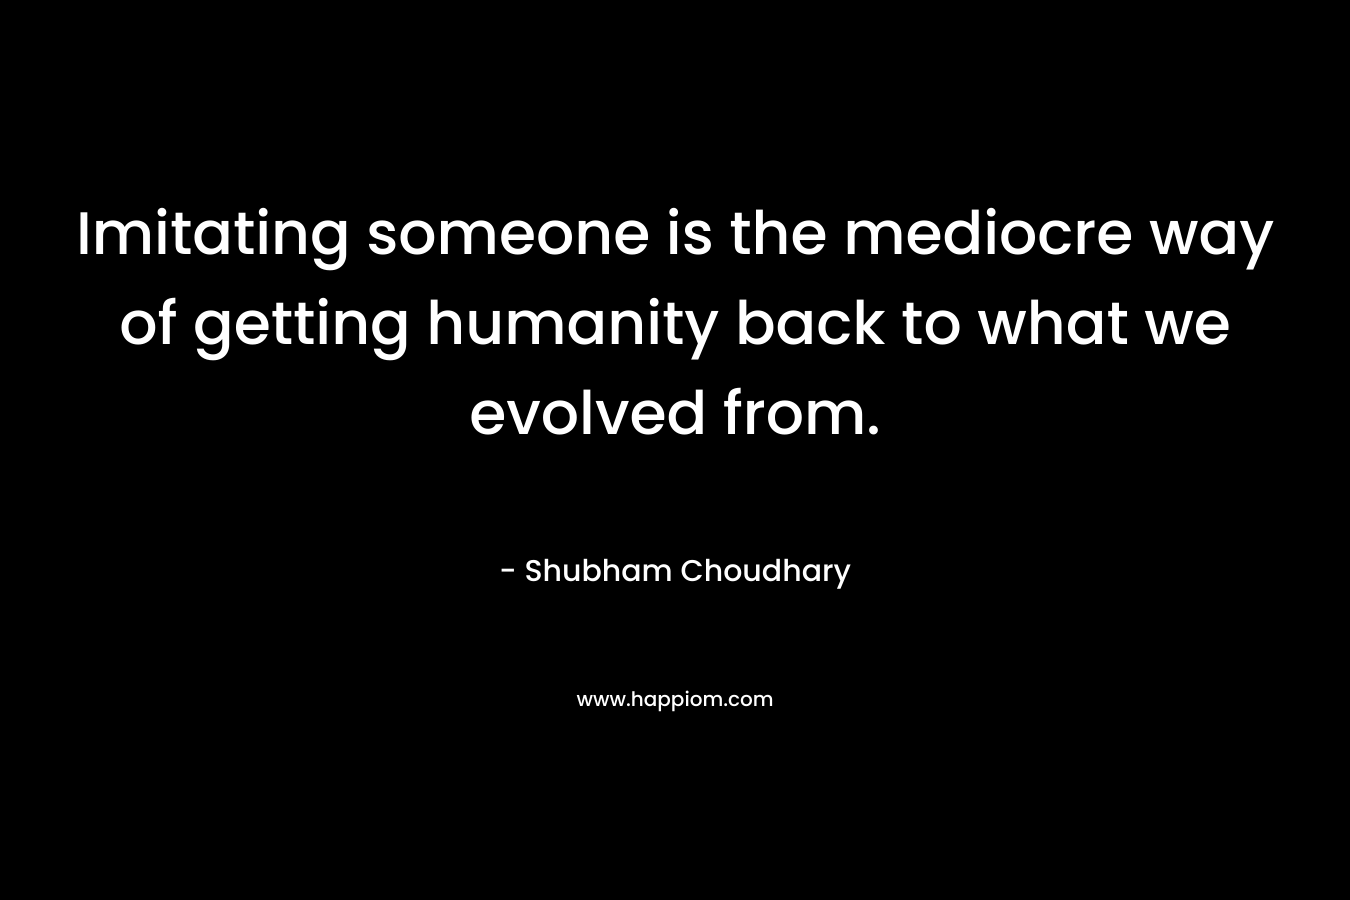 Imitating someone is the mediocre way of getting humanity back to what we evolved from. – Shubham Choudhary